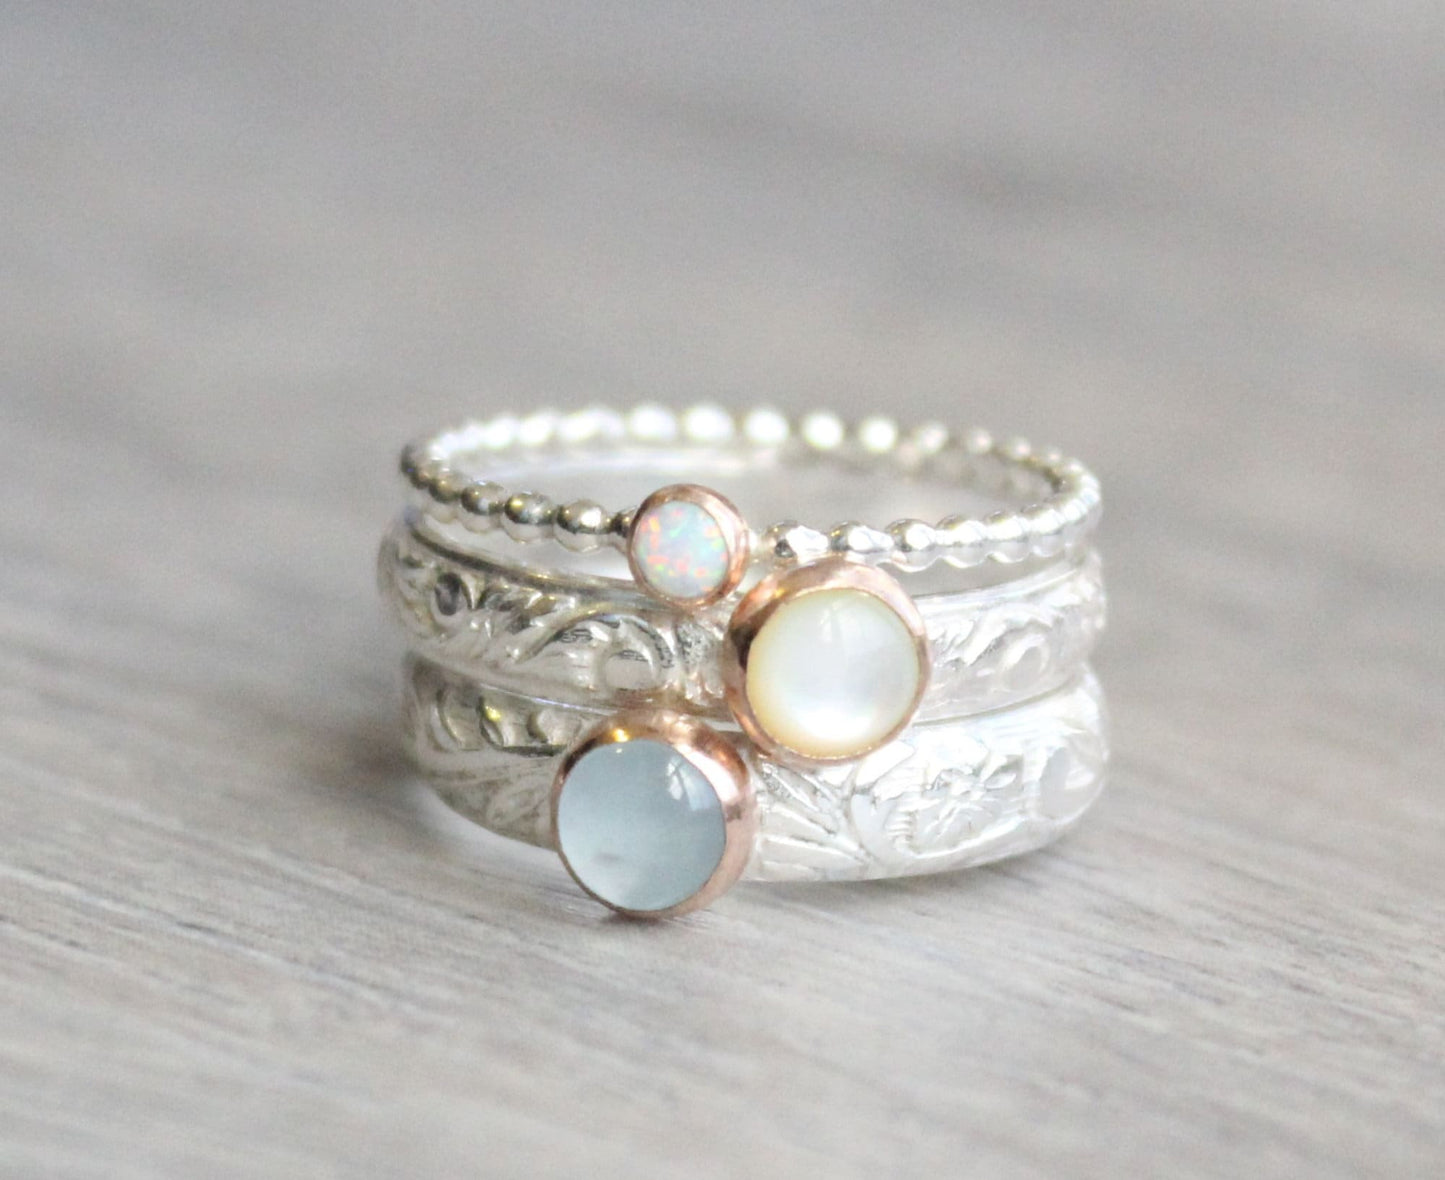 Gemstone Stacking Ring Set // Mother of Pearl Opal and Aquamarine Rings // Sterling Silver and Rose Gold Gemstone Rings // Mother's Ring Set